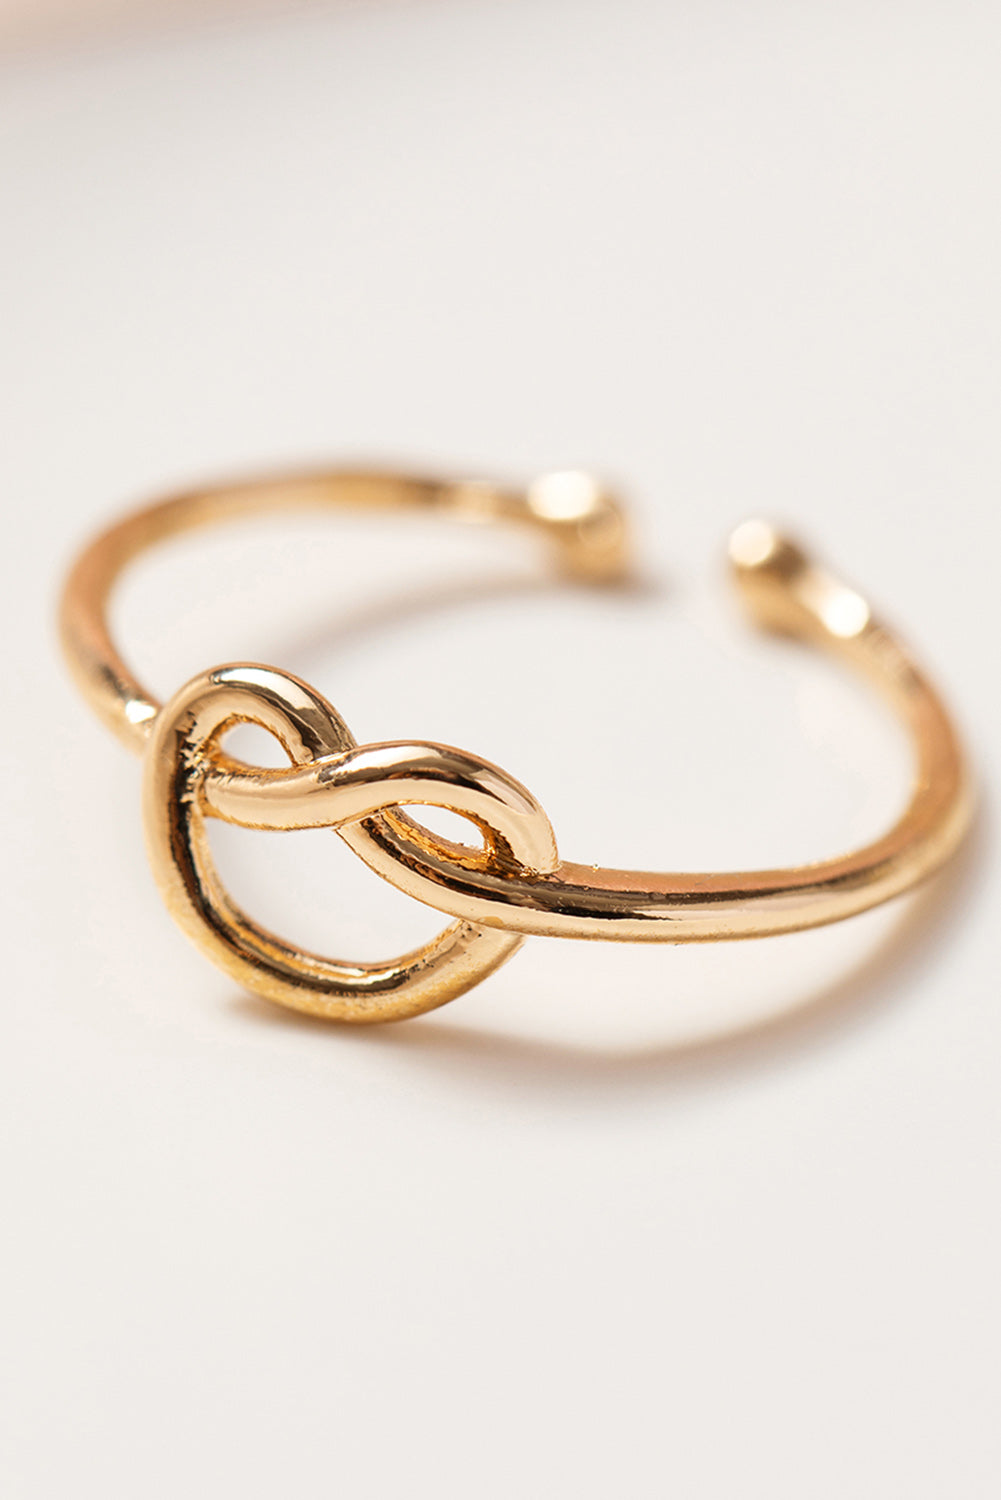 Gold Knot A Heart Valentines Fashion Ring Jewelry JT's Designer Fashion